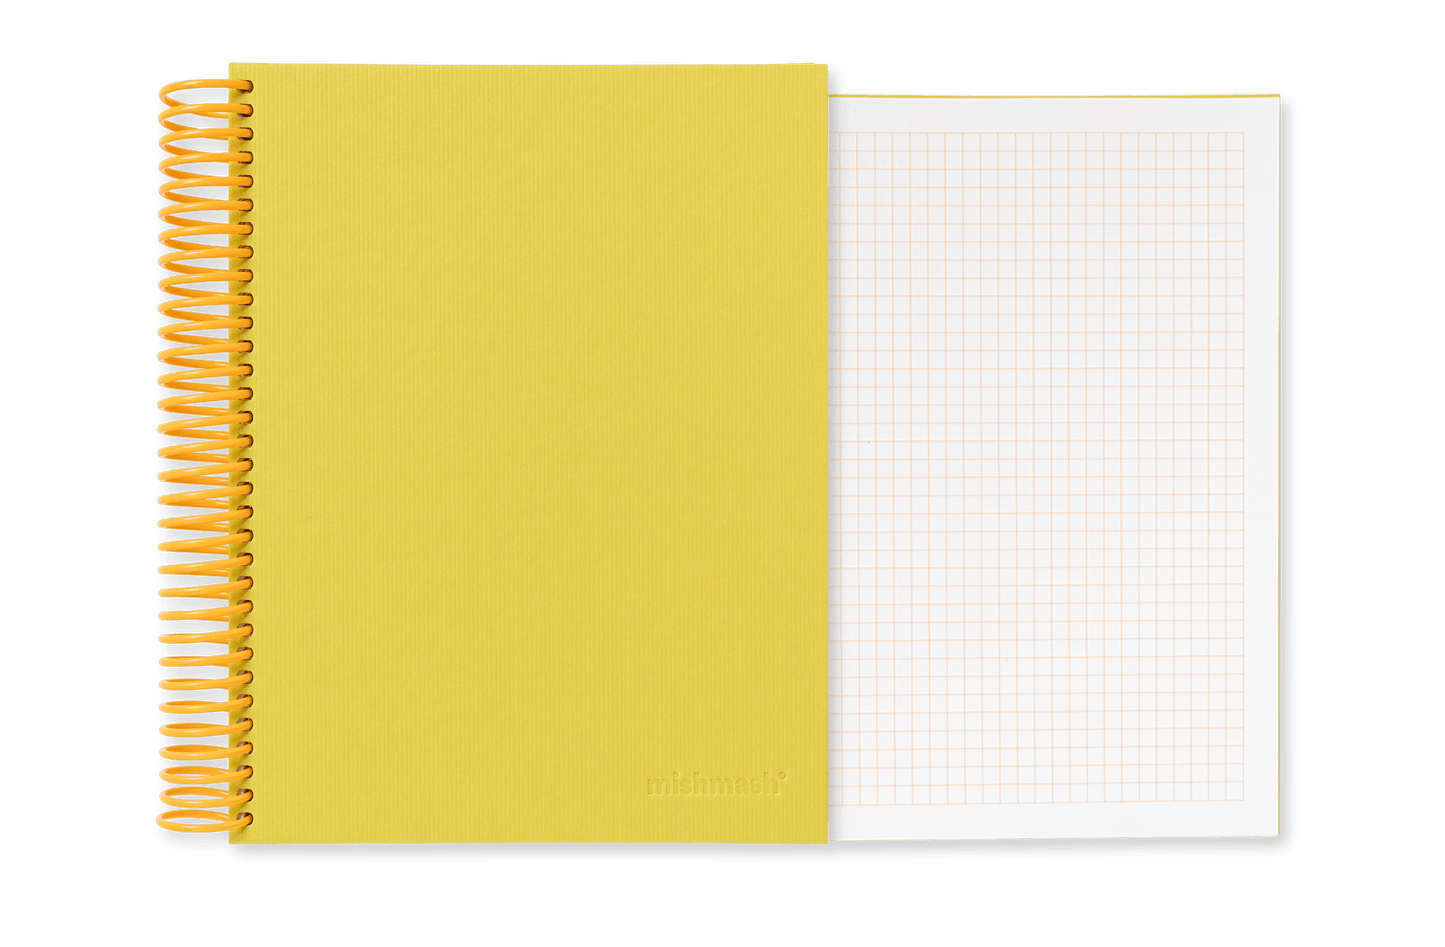 Easy Breezy Coil A5 Notebook in Chartreuse - Grid